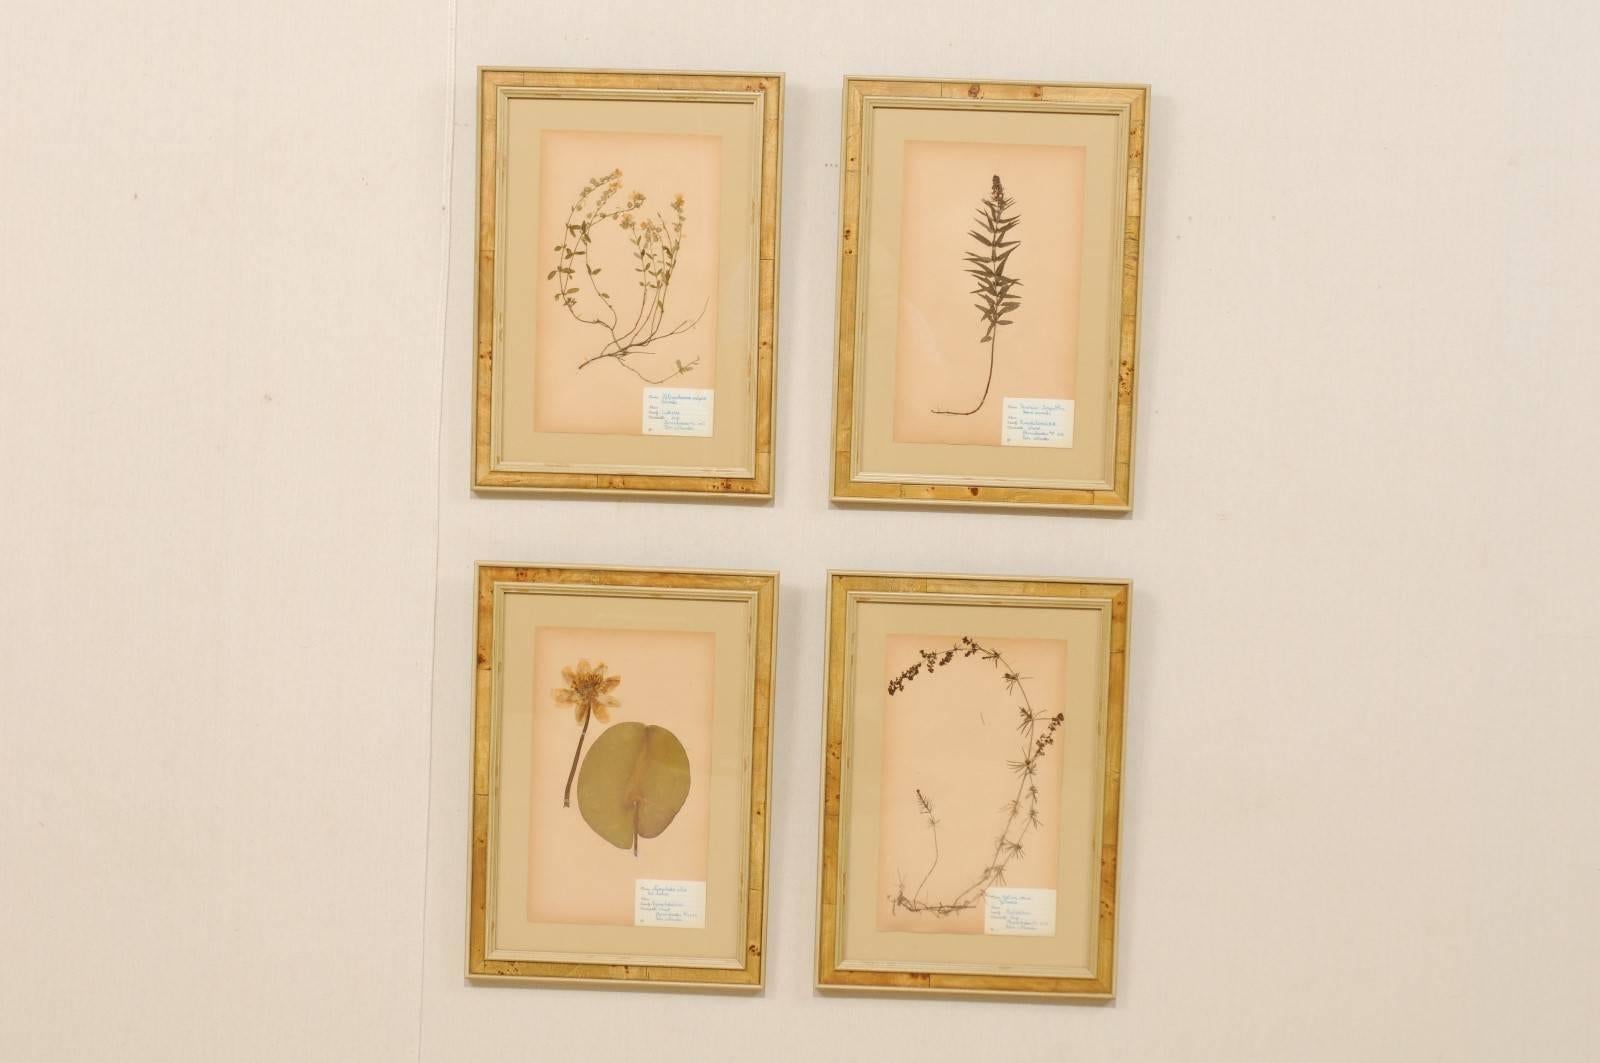 A set of four Swedish framed herbariums or botanicals from the mid-20th century. These Swedish 1950s herbariums are featured in custom light burl frames. Each pressed botanical specimens includes a hand written label with the plants name, variety,